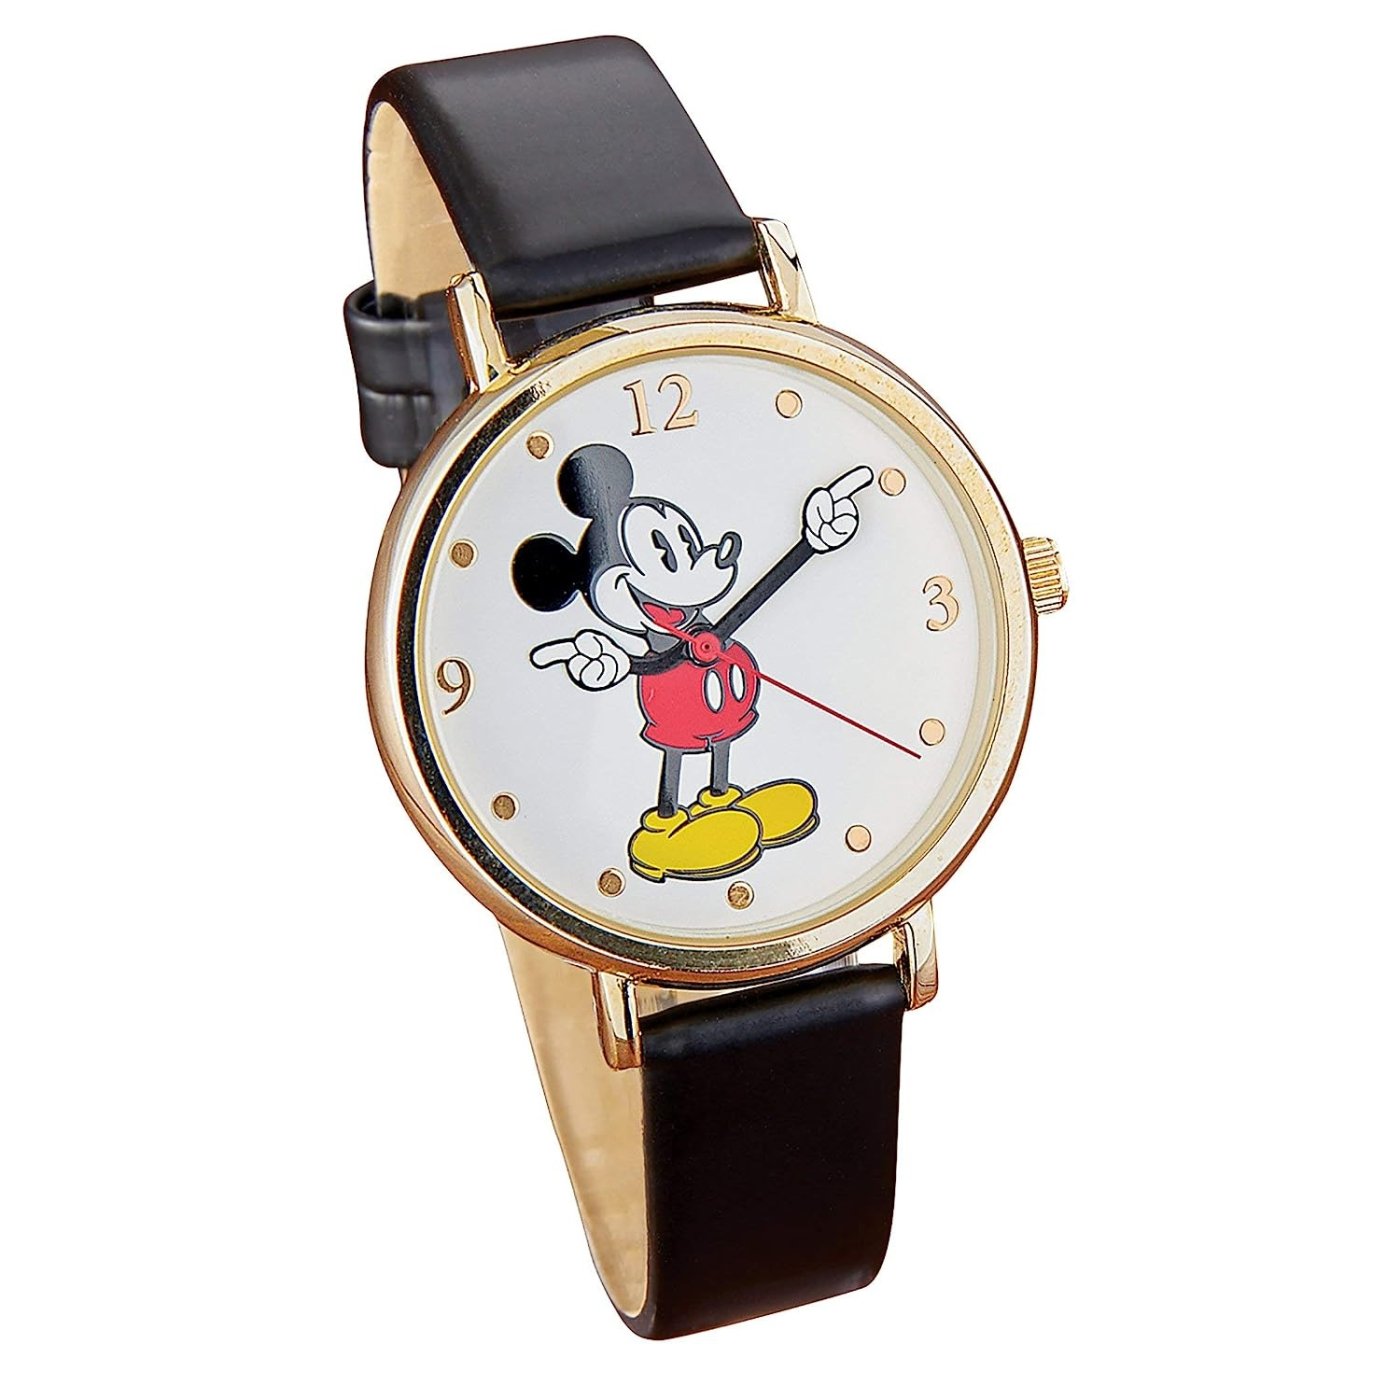 Model: Classic Gold Tone Black Strap Mickey Mouse Hands Watch